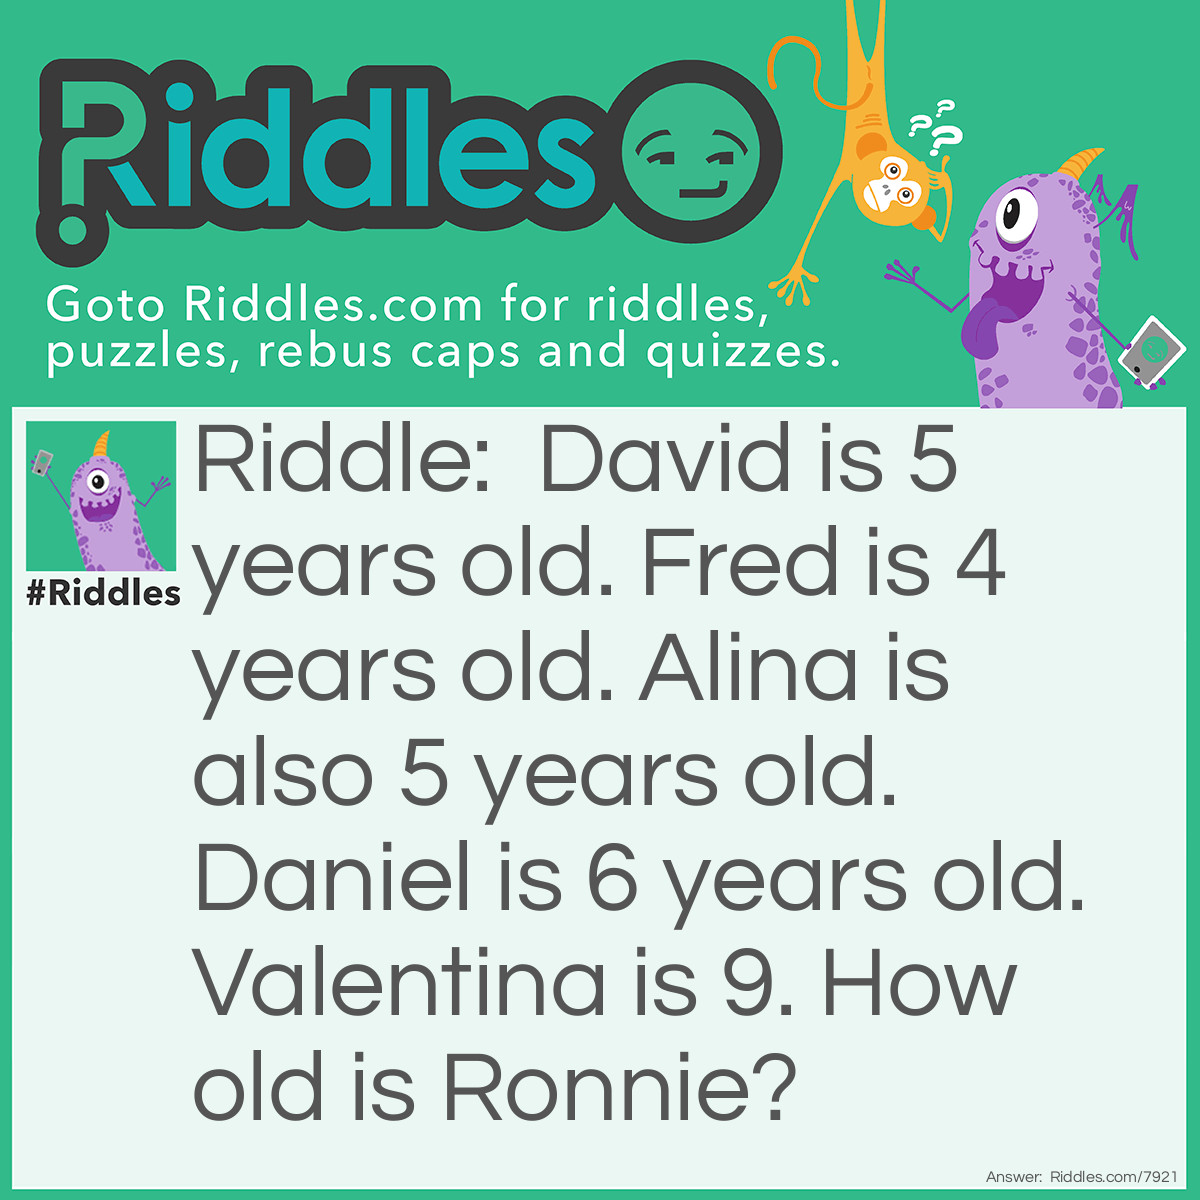 Riddle: David is 5 years old. Fred is 4 years old. Alina is also <a href="/riddles-for-kids">5 years old</a>. Daniel is 6 years old. Valentina is 9. How old is Ronnie? Answer: Ronnie is 6 because each person's age is the same as the number of letters in their name.